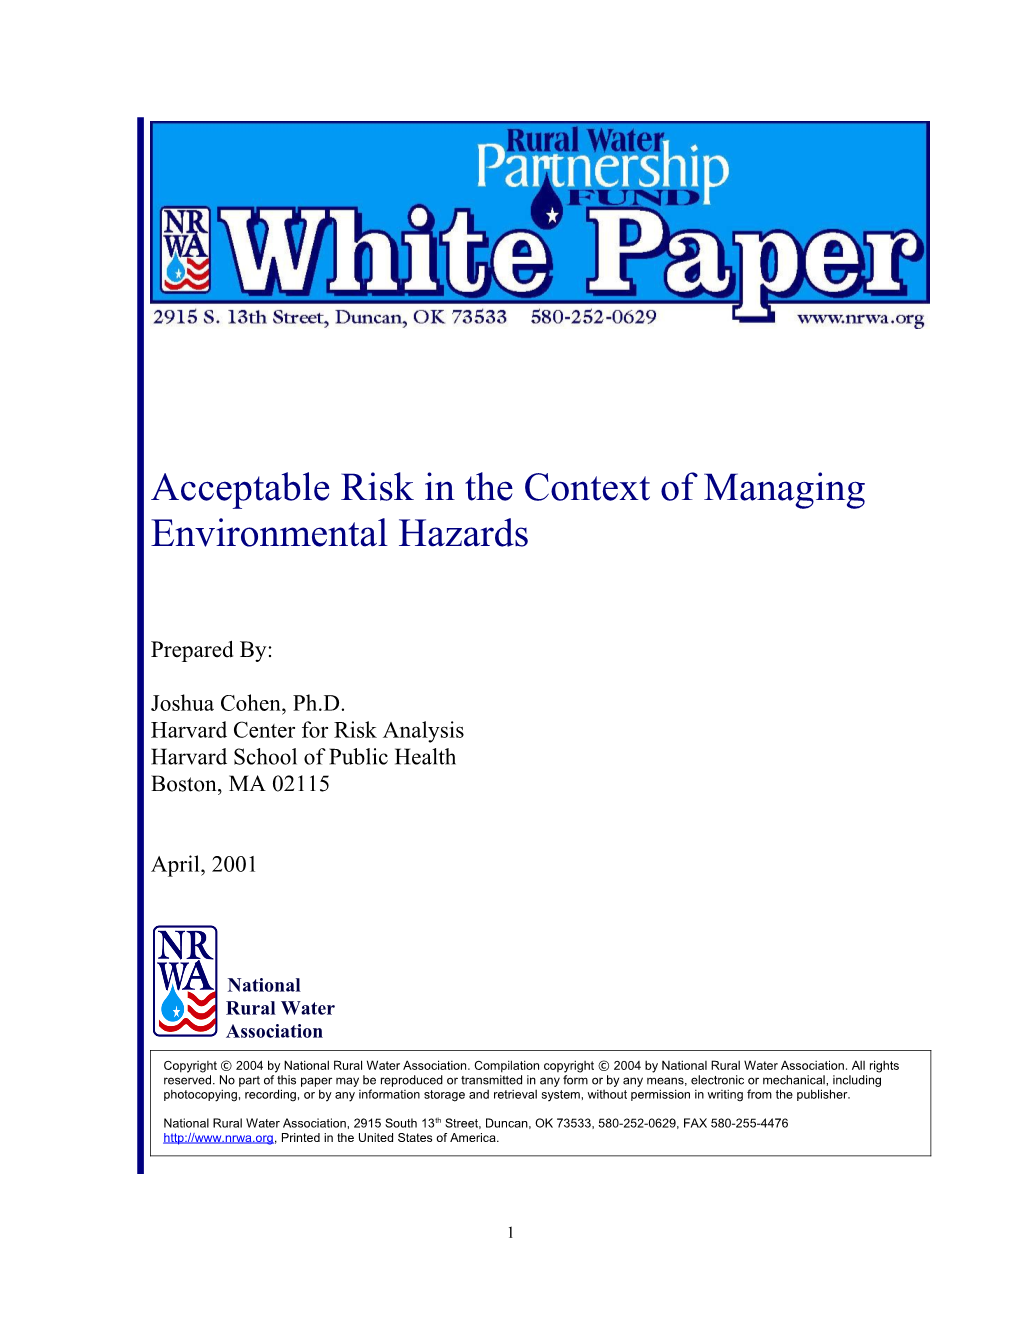 Acceptable Risk in the Context of Managing Environmental Hazards